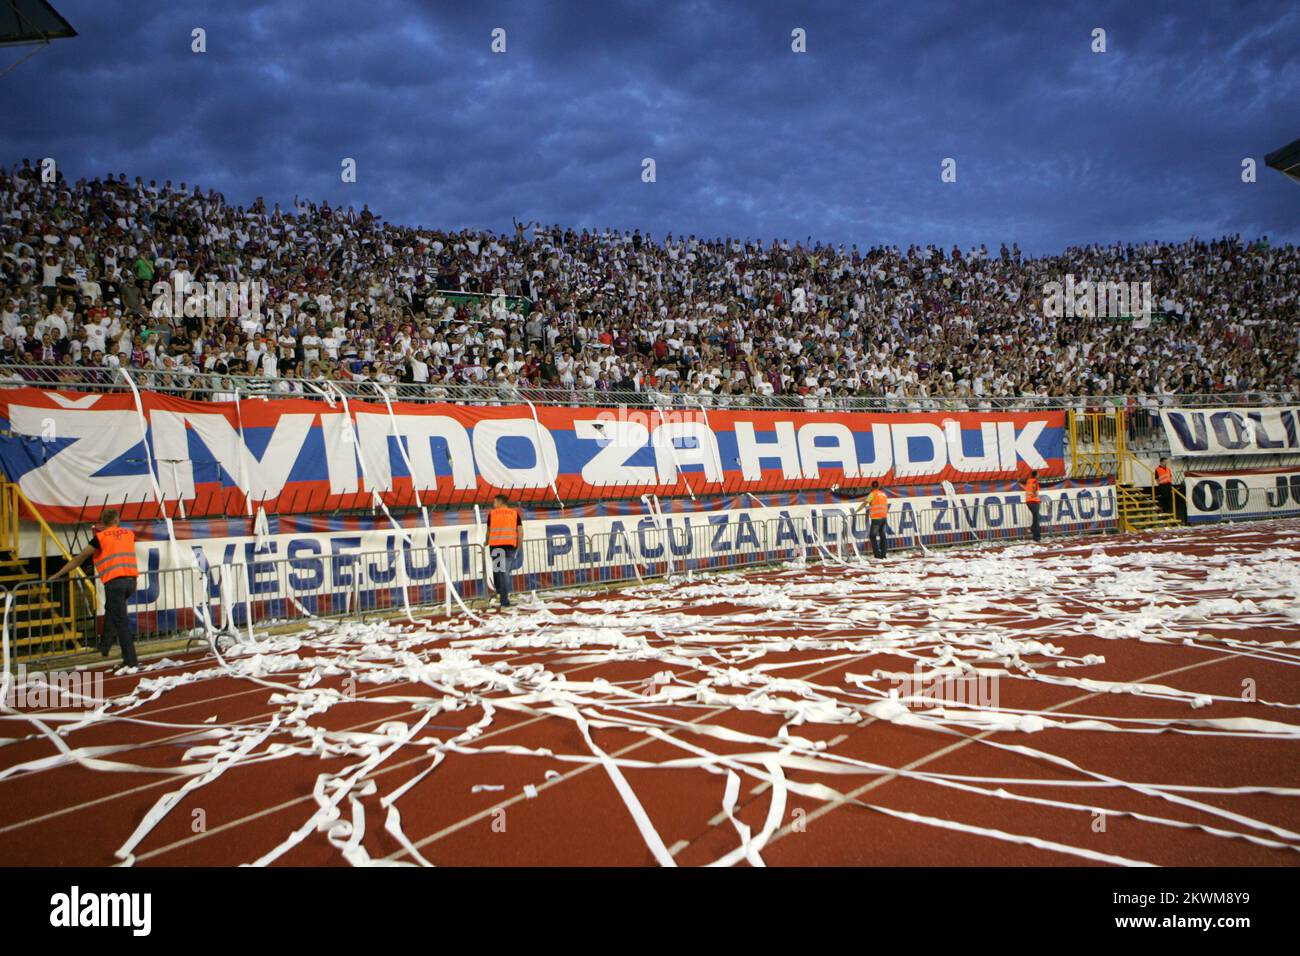 2,054 Hnk Hajduk Split Photos & High Res Pictures - Getty Images